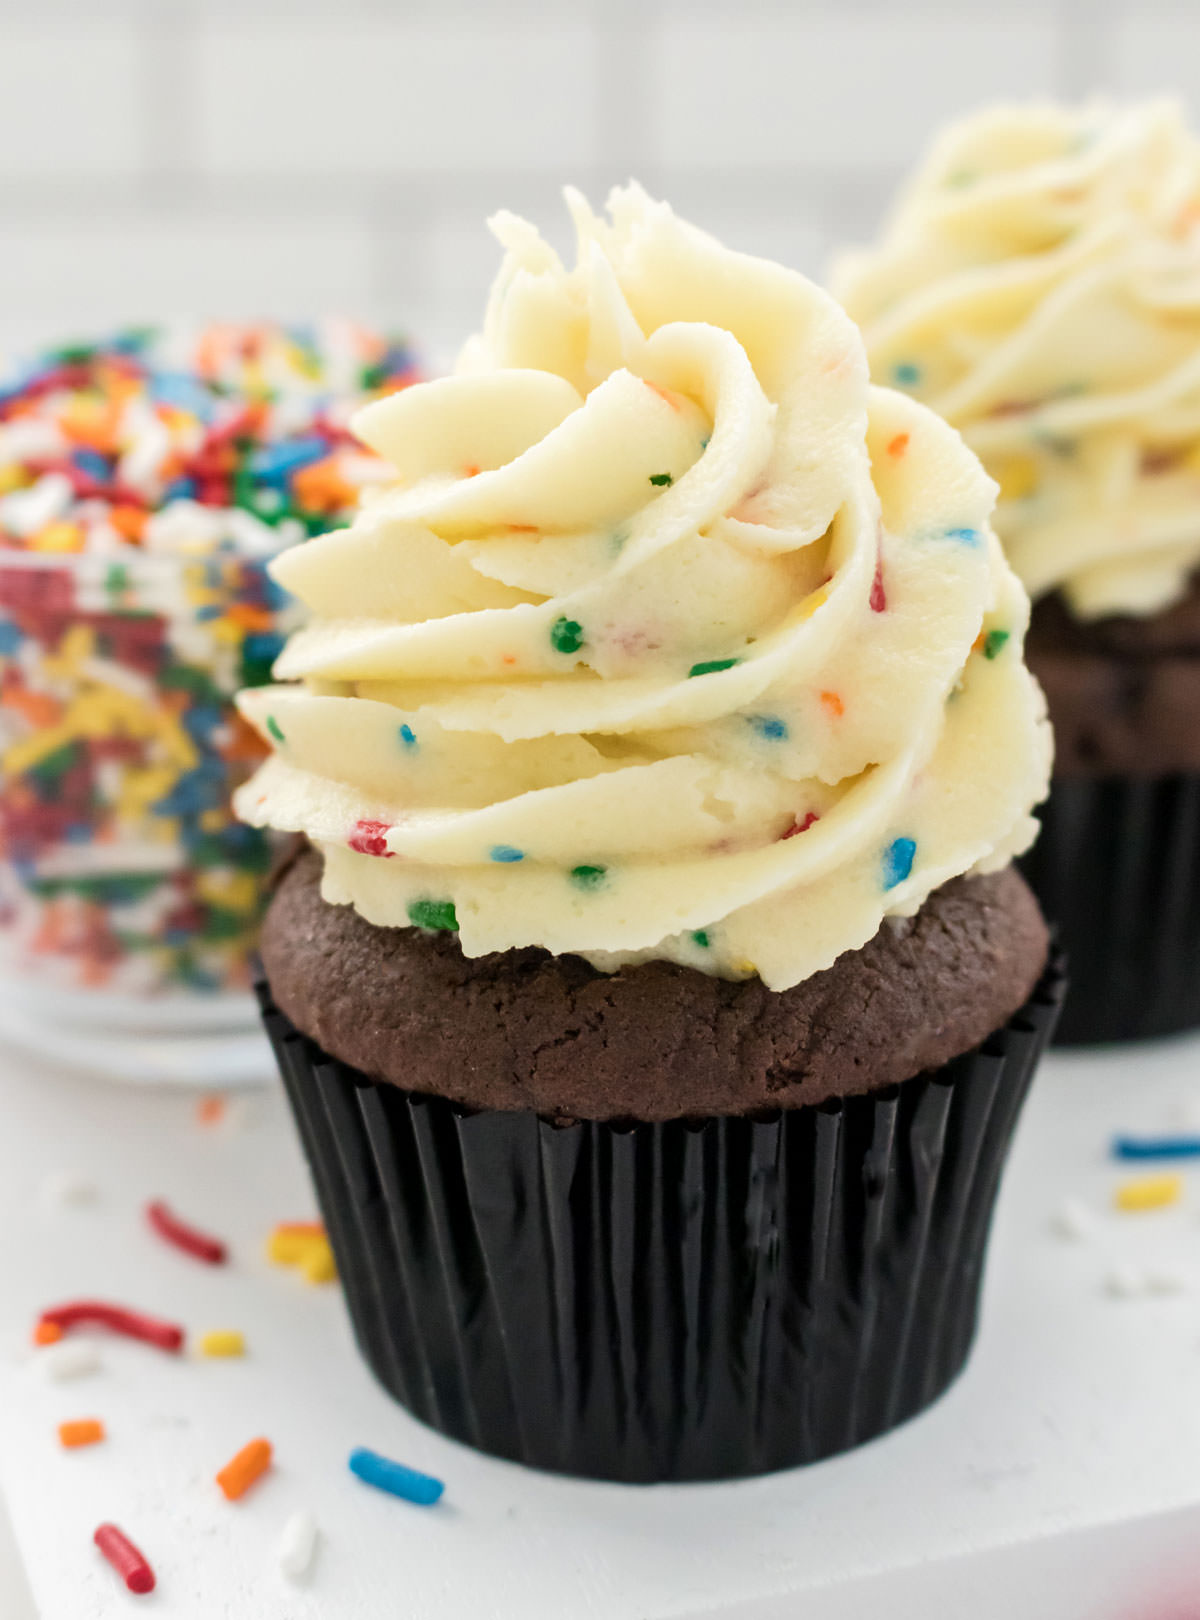 Closeup on a chocolate cupcake topped with The Best Cake Batter Buttercream Frosting sitting next to a glass bowl filled with sprinkles.